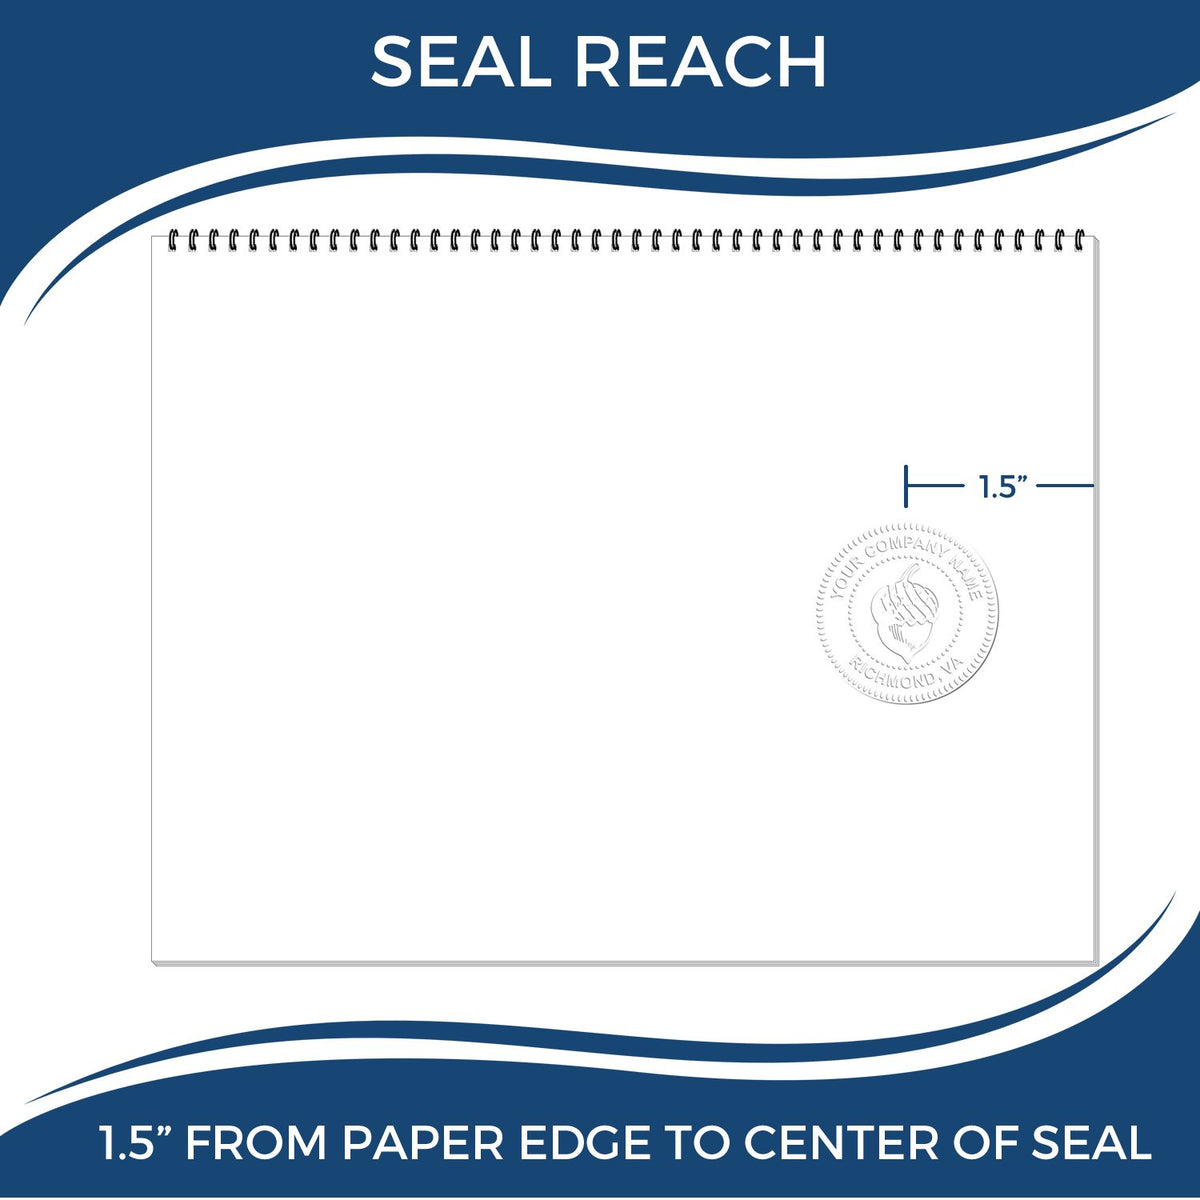 An infographic showing the seal reach which is represented by a ruler and a miniature seal image of the State of Arizona Soft Land Surveyor Embossing Seal